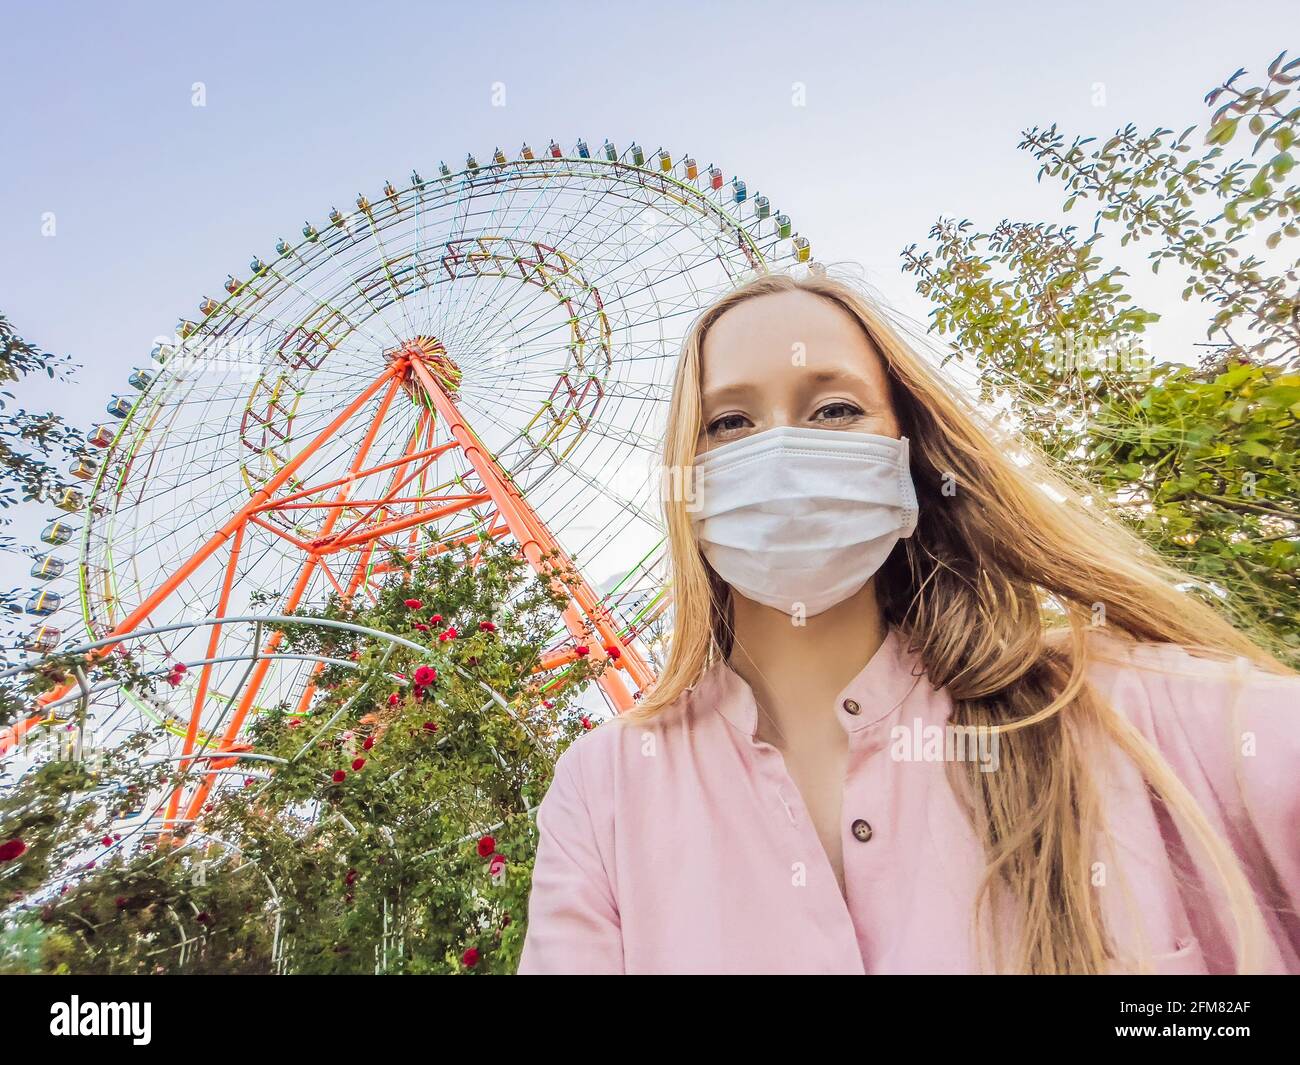 A woman in a pink dress takes a selfie on the background of a ferris wheel Stock Photo